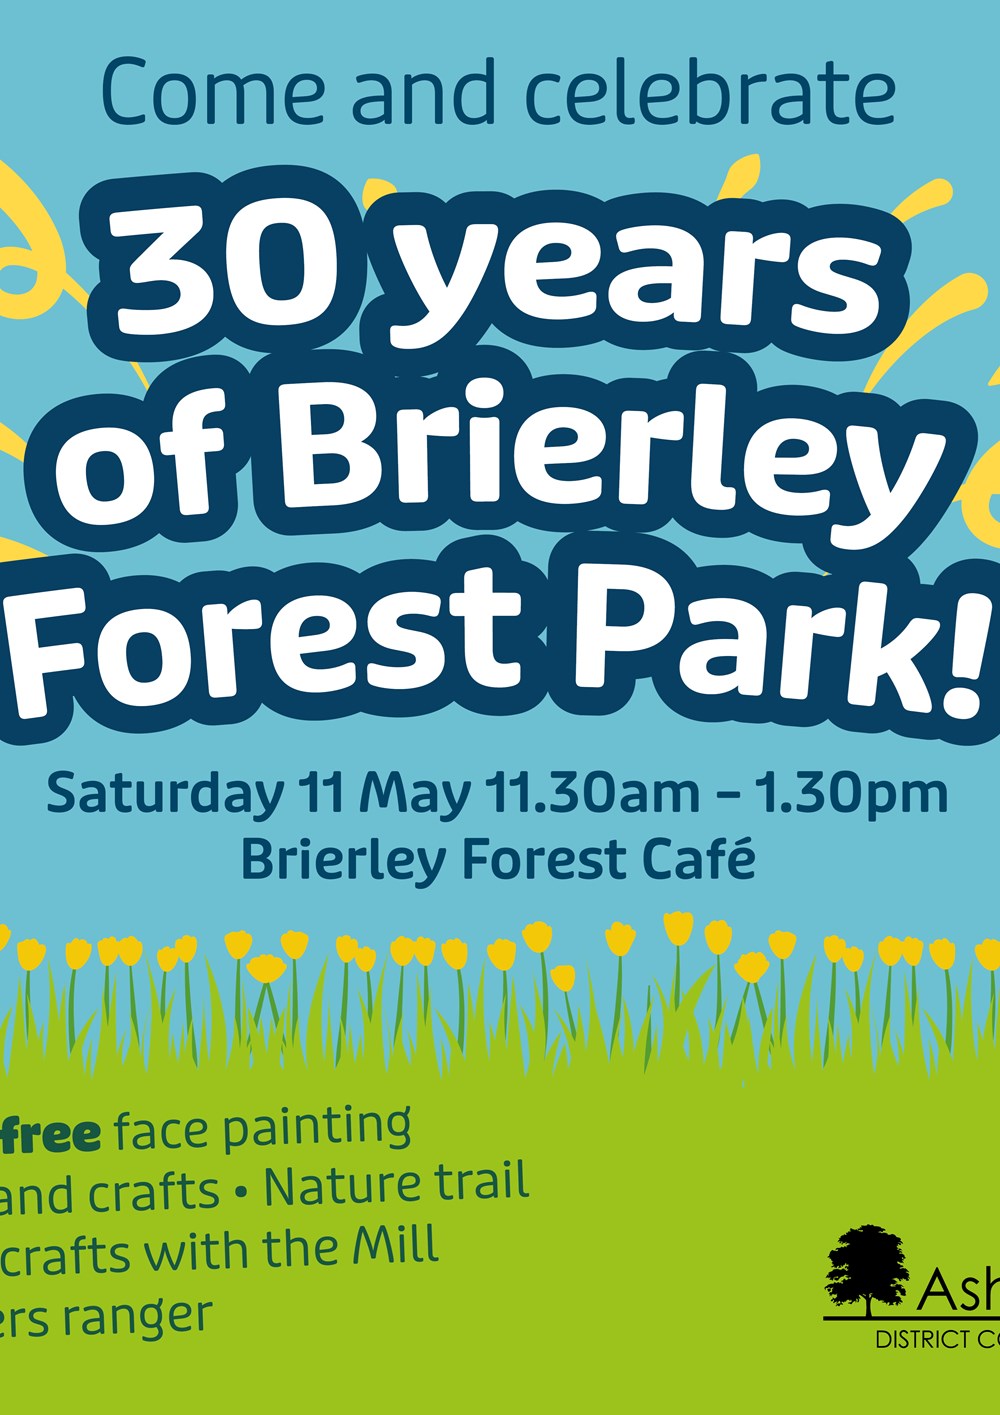 Celebrate 30 years of Brierley Forest Park 